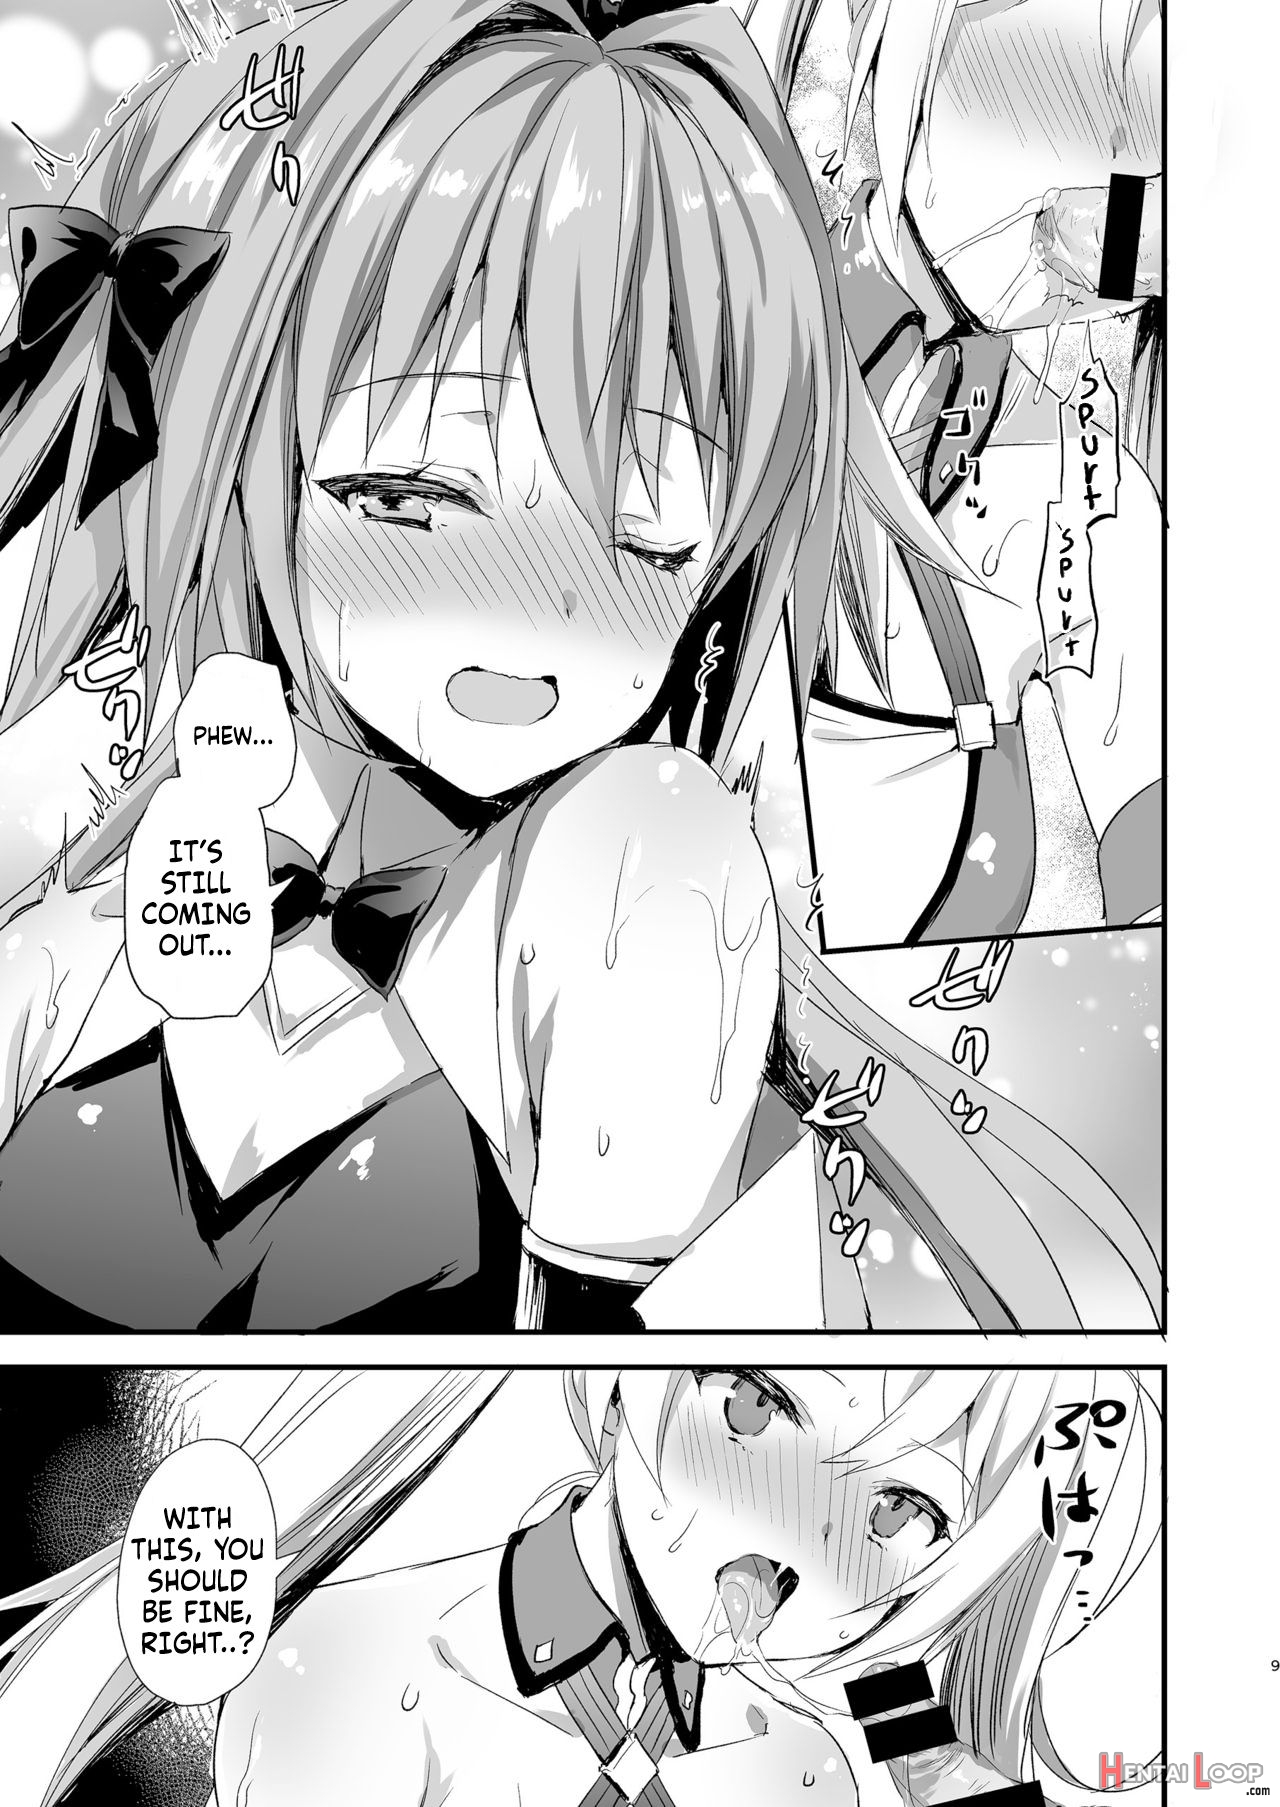 Milking Astolfo page 8